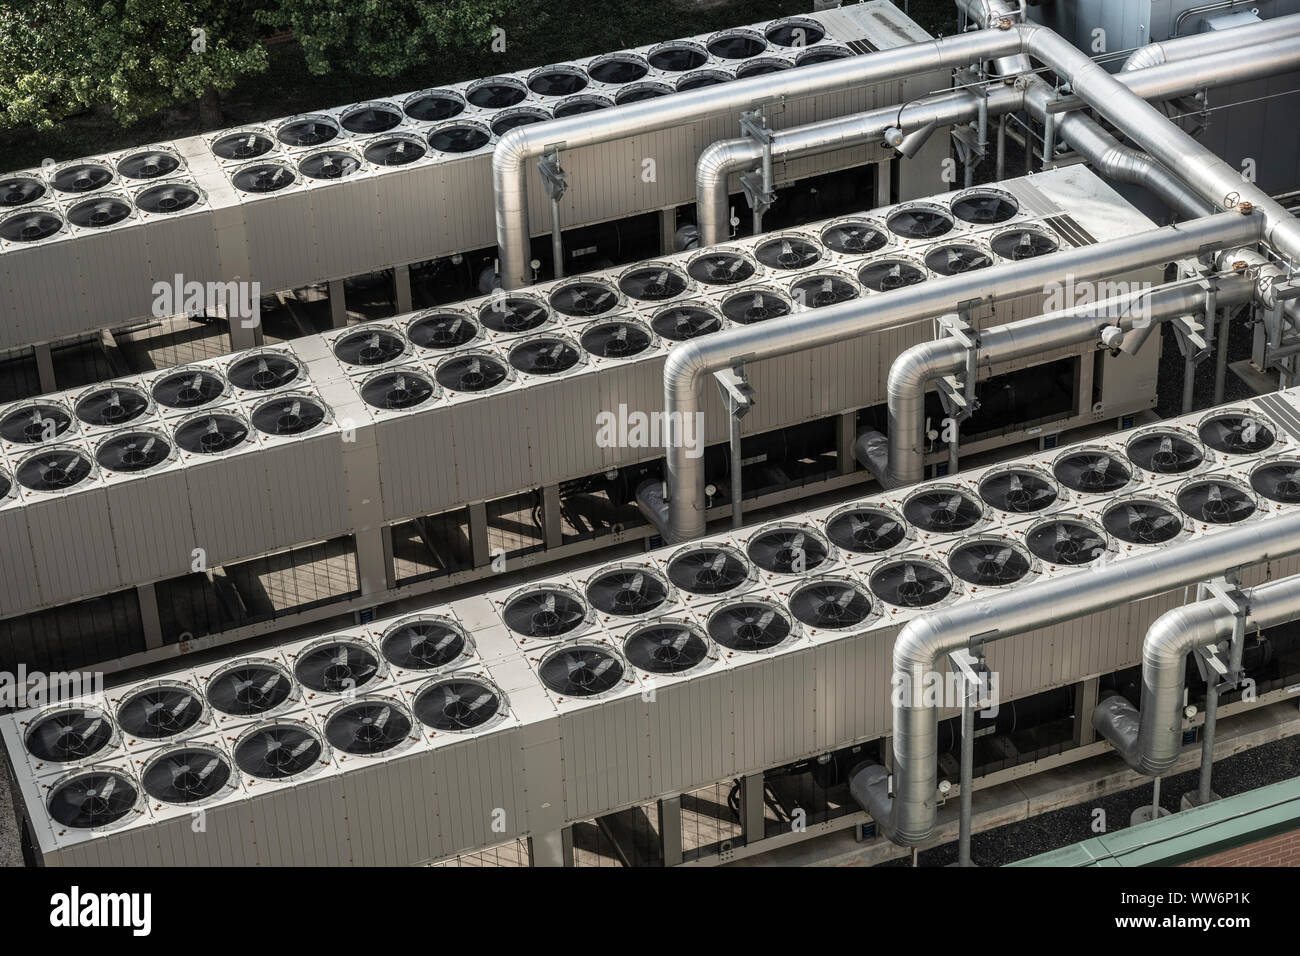 Rows of many commercial roof top air conditioners Stock Photo